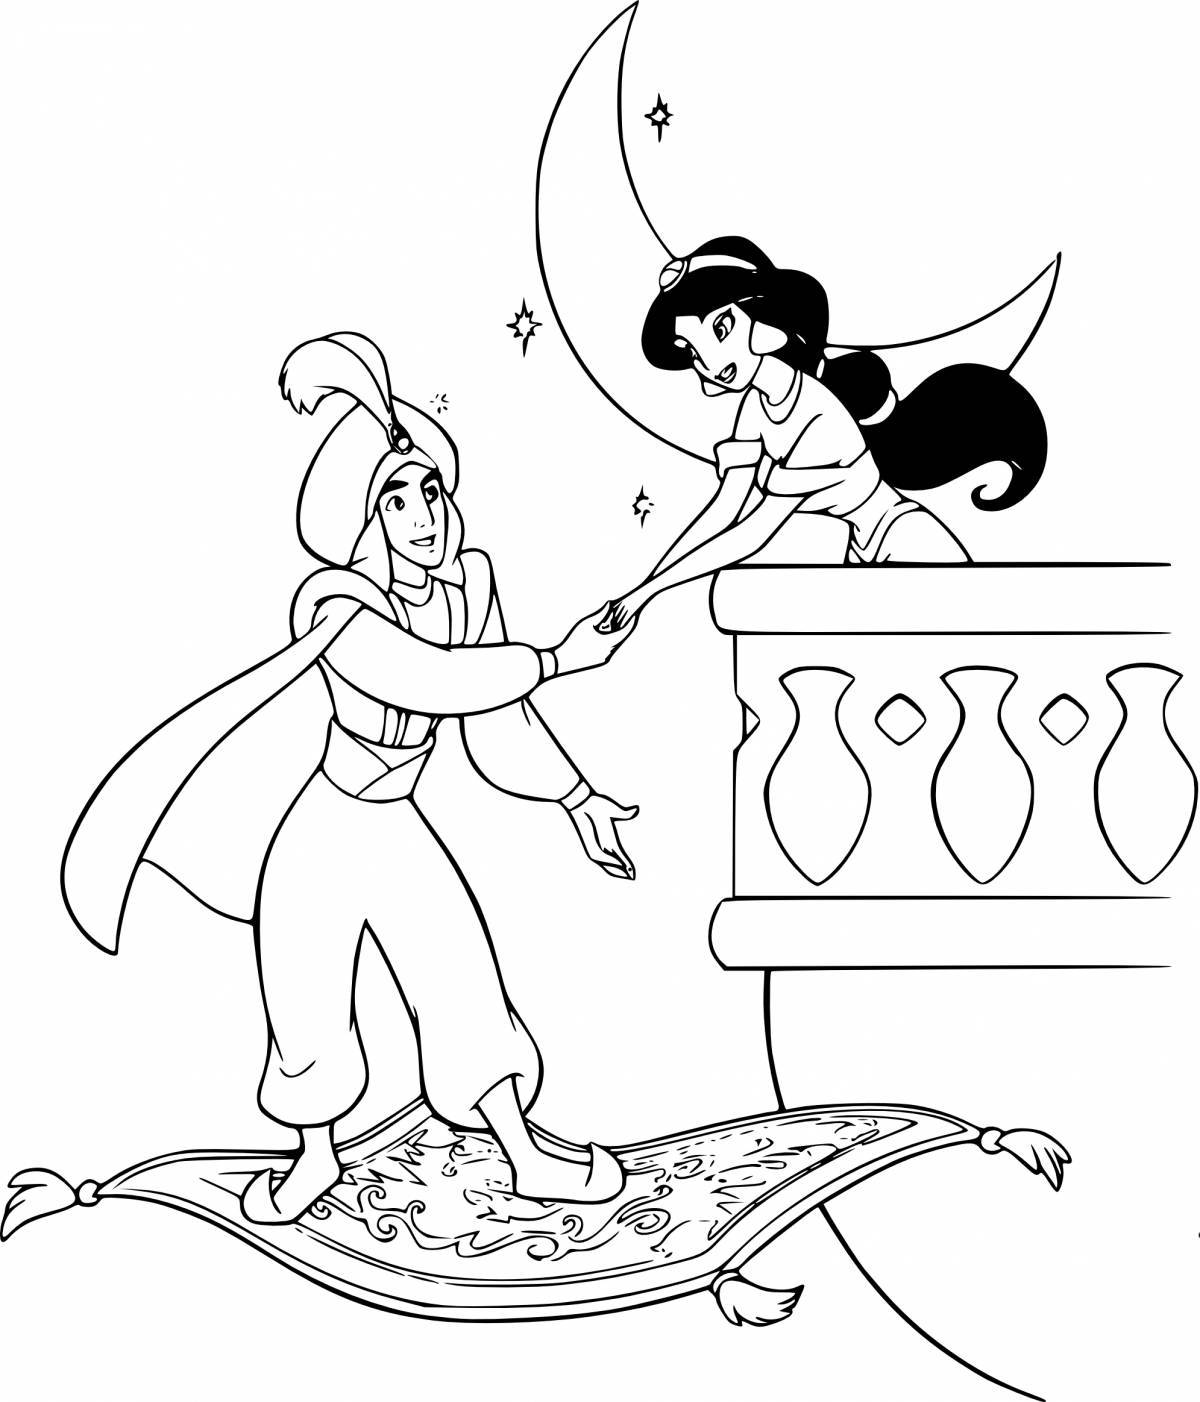 Awesome Aladdin coloring book